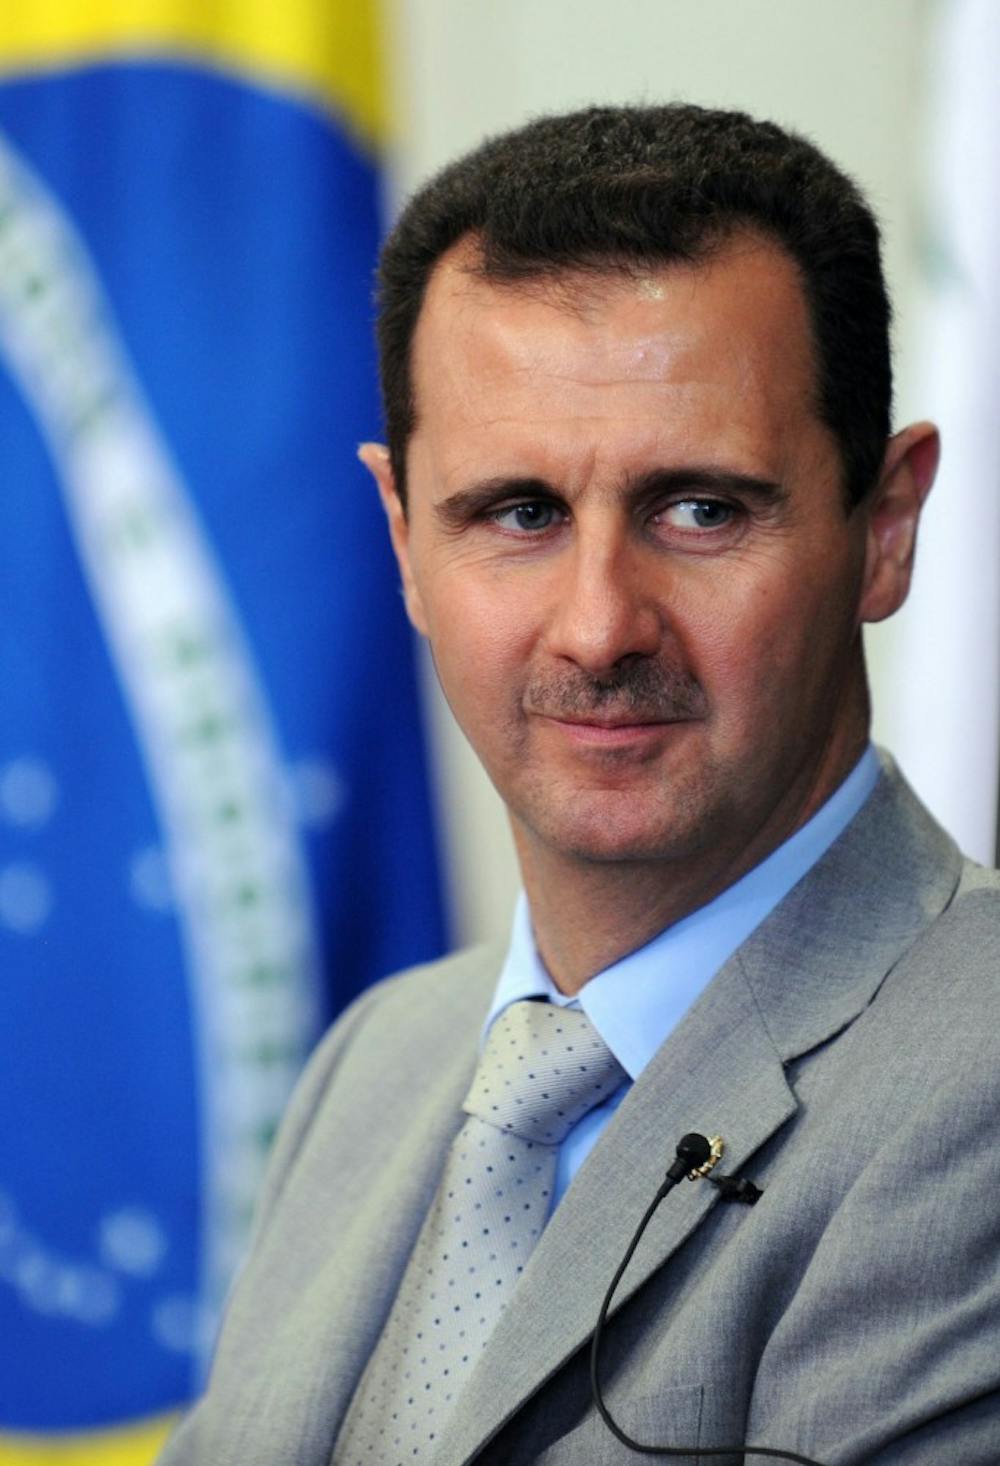 Syrian President Bashar Al-Assad conducted chemical attacks last week, leading to U.S. missile strikes against a Syrian airfield